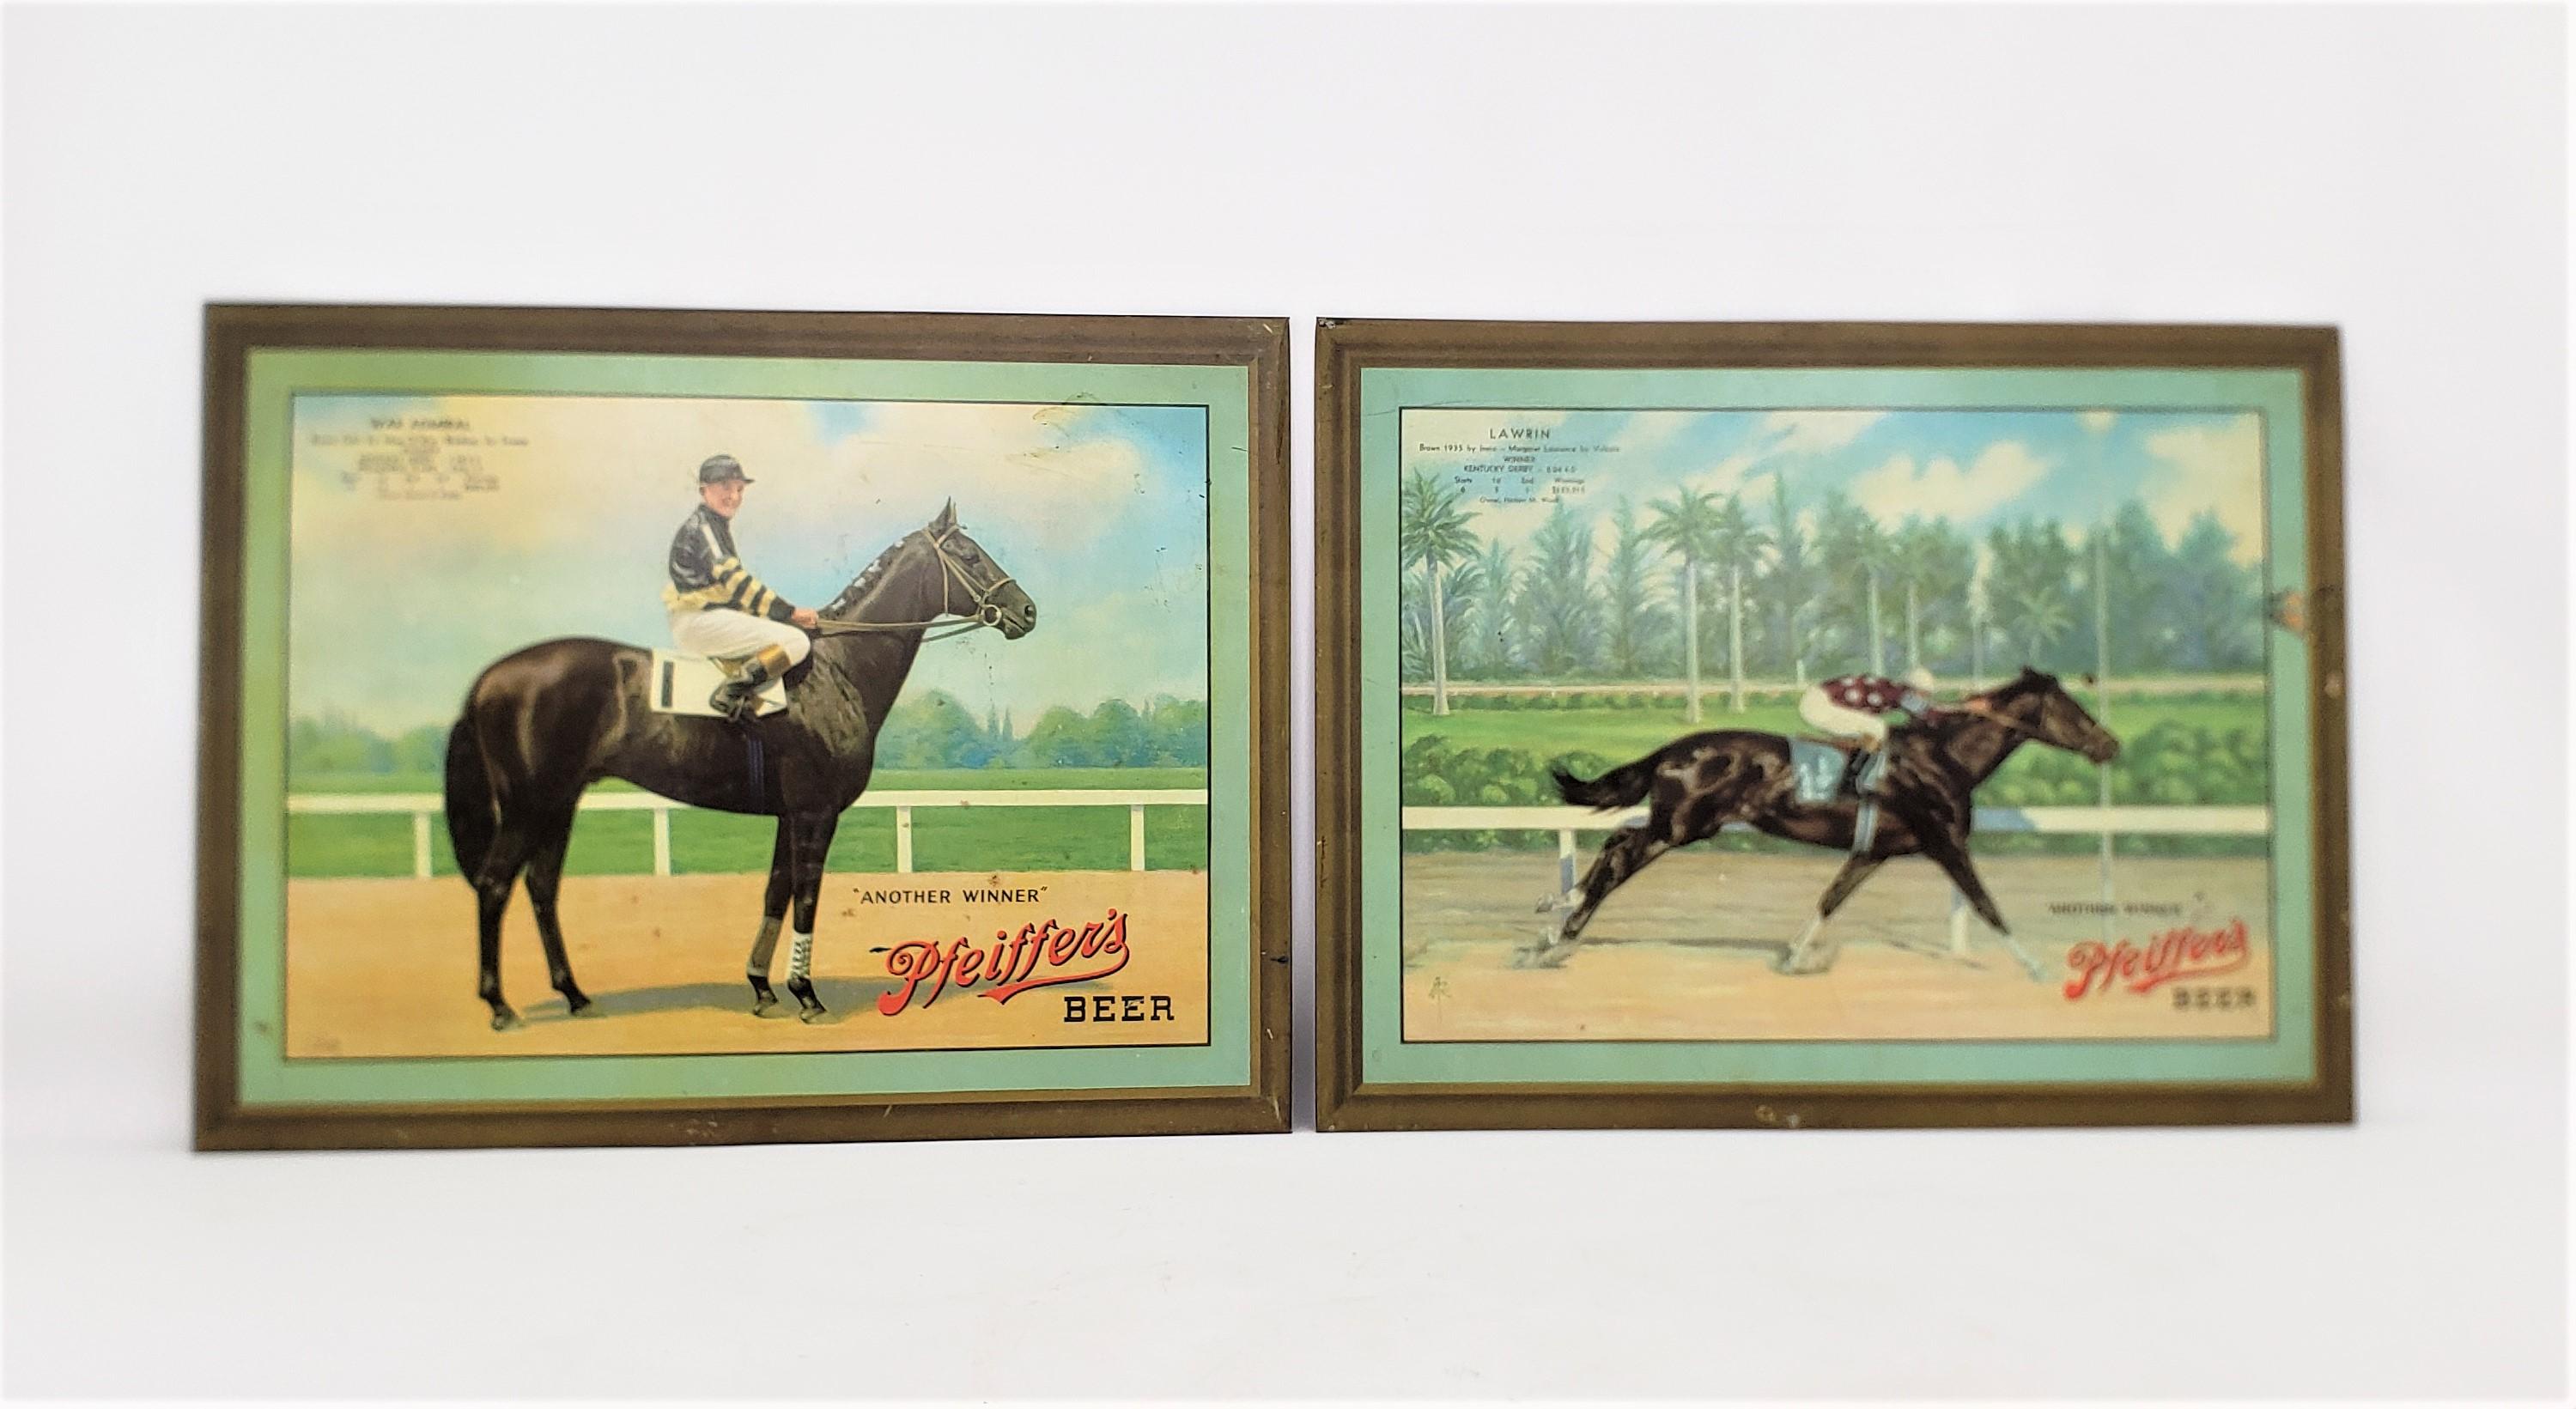 This pair of wall hangings were manufactured by the Pfeiffer Brewery of the United States in approximately 1960 in the period Mid-Century Modern style. The wall hangings are composef of metal with a cardboard backing and depict two champion horses